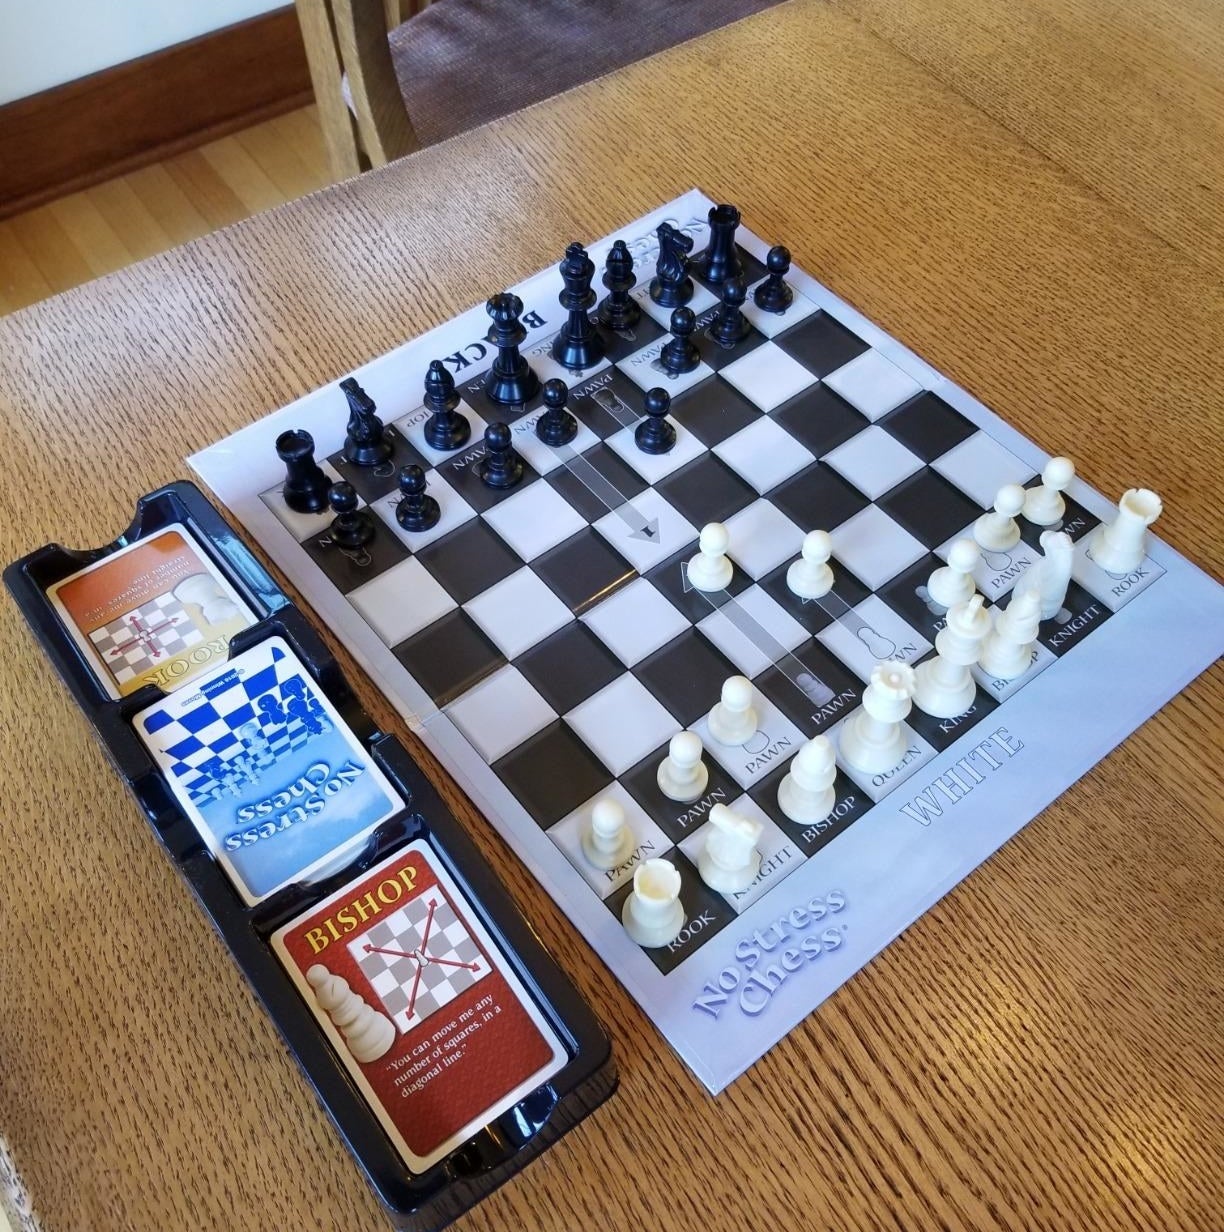 Chess Sets Are Suddenly This Year's Hottest Holiday Gift, Thanks to Netflix